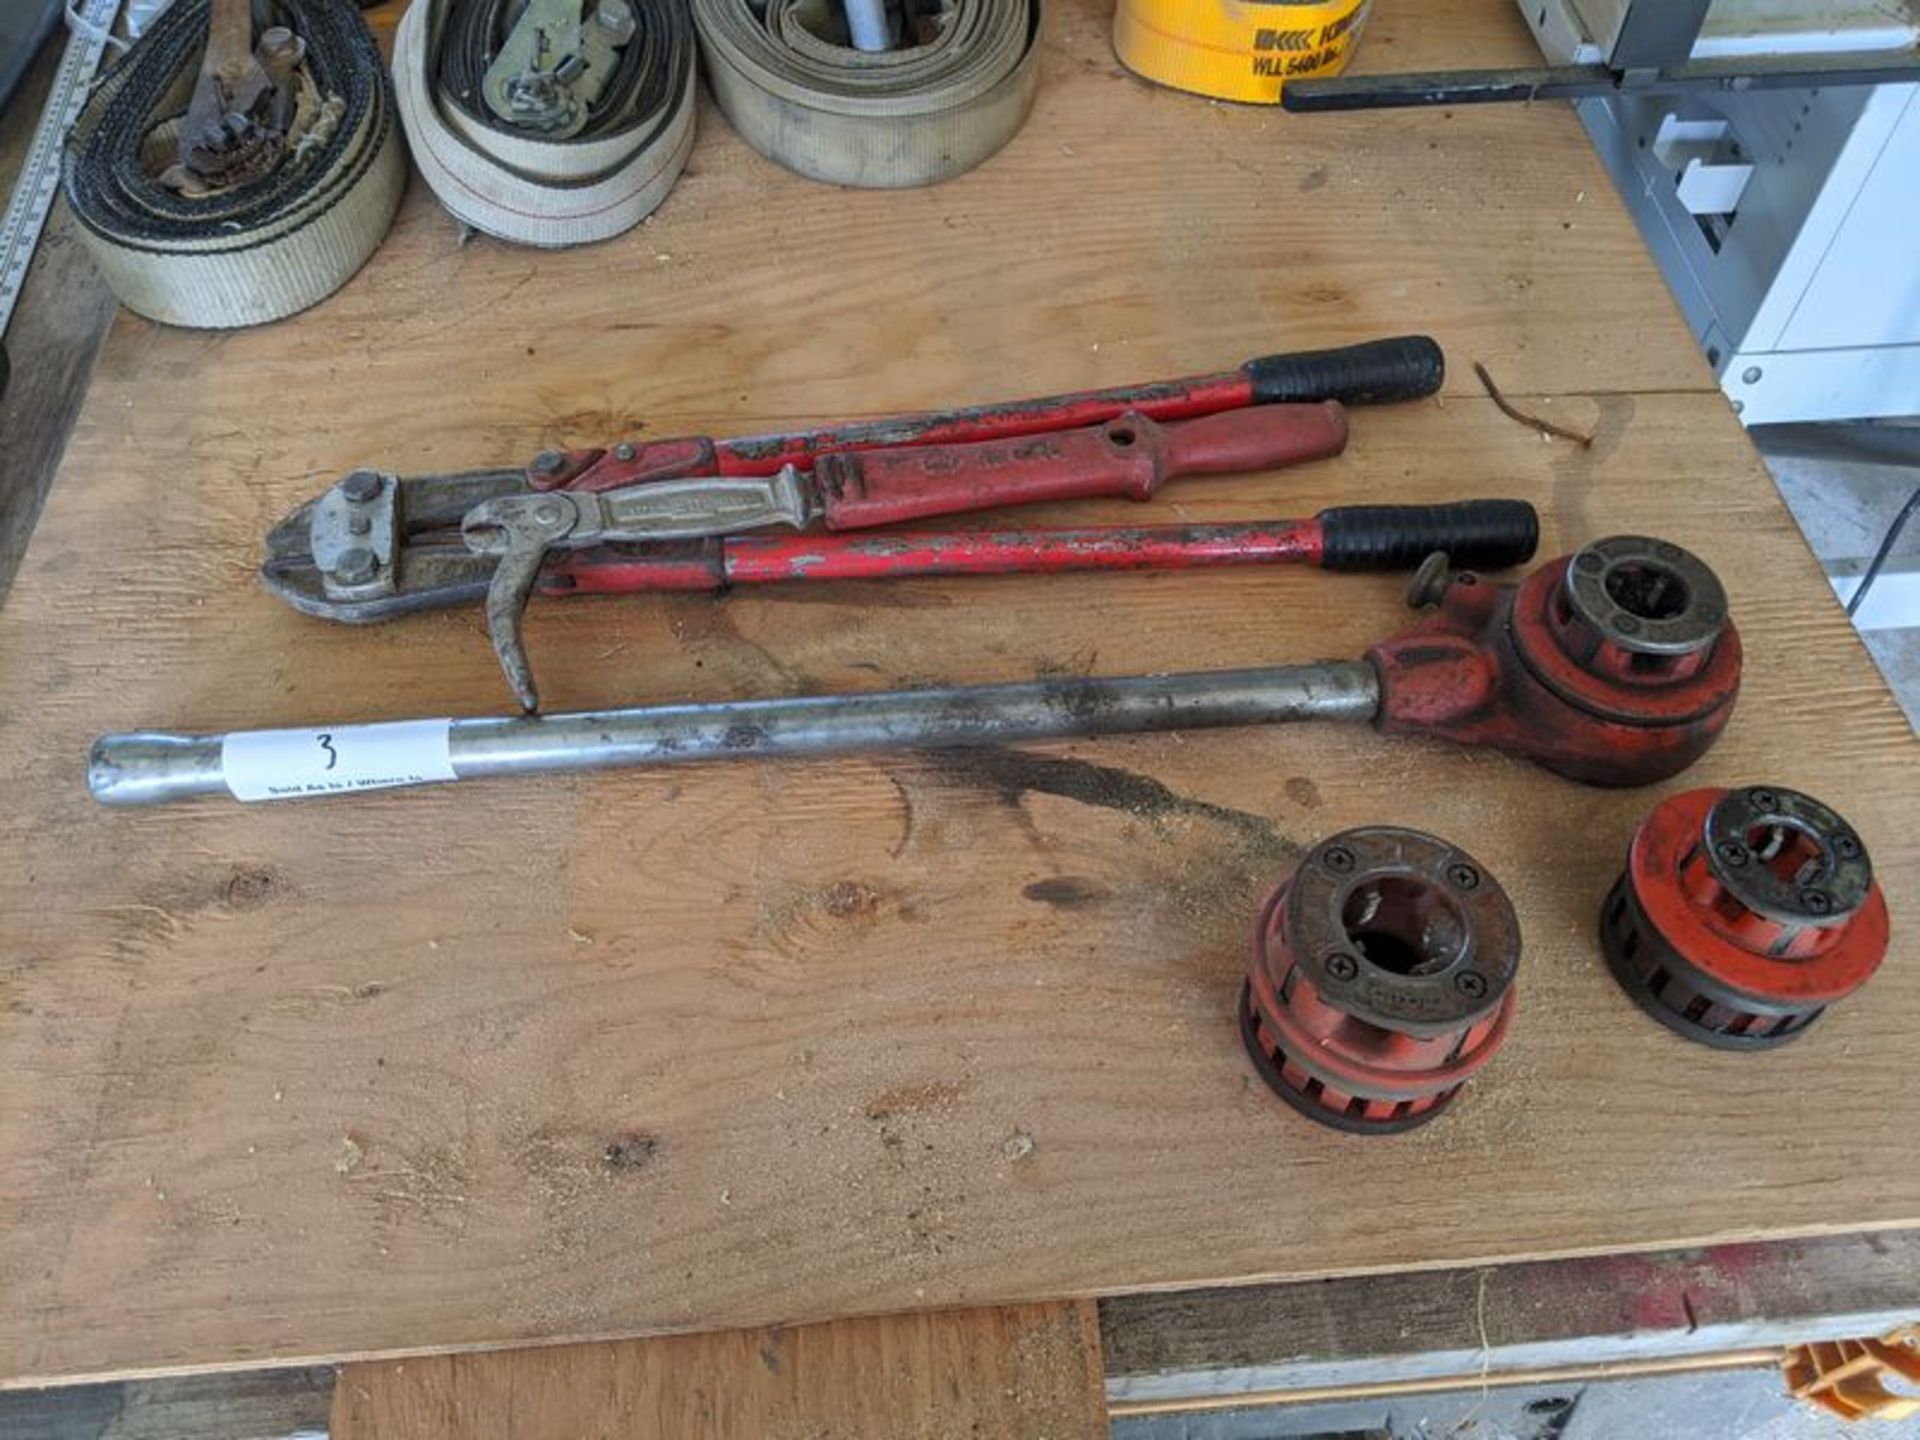 Pipe Threader, Bolt Cutter and Nail Puller